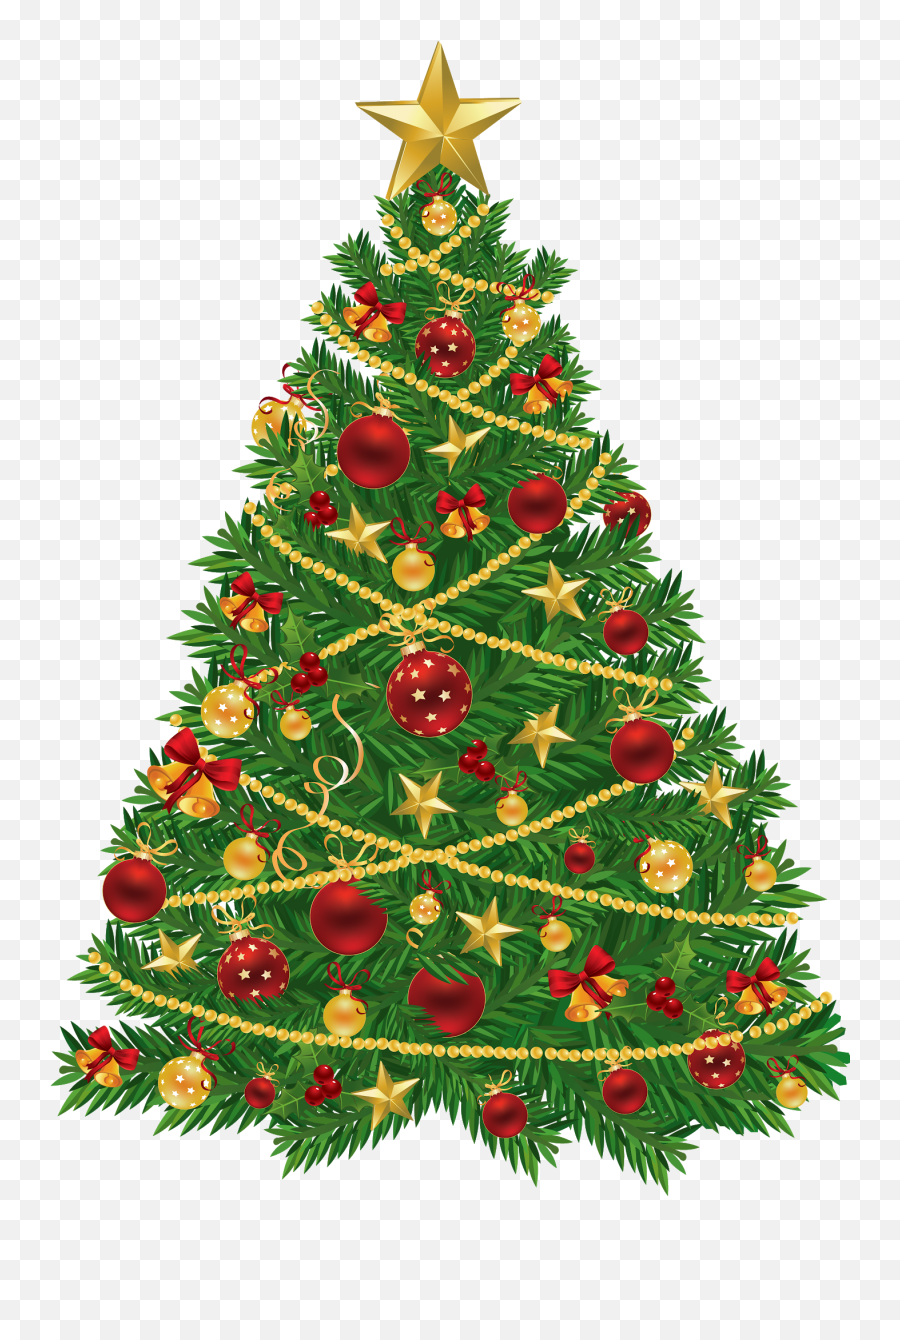 Christmas Bow - Christmas Tree Transparent Hd Png Download Clipart Transparent Background Christmas Tree,Transparent Christmas Bow